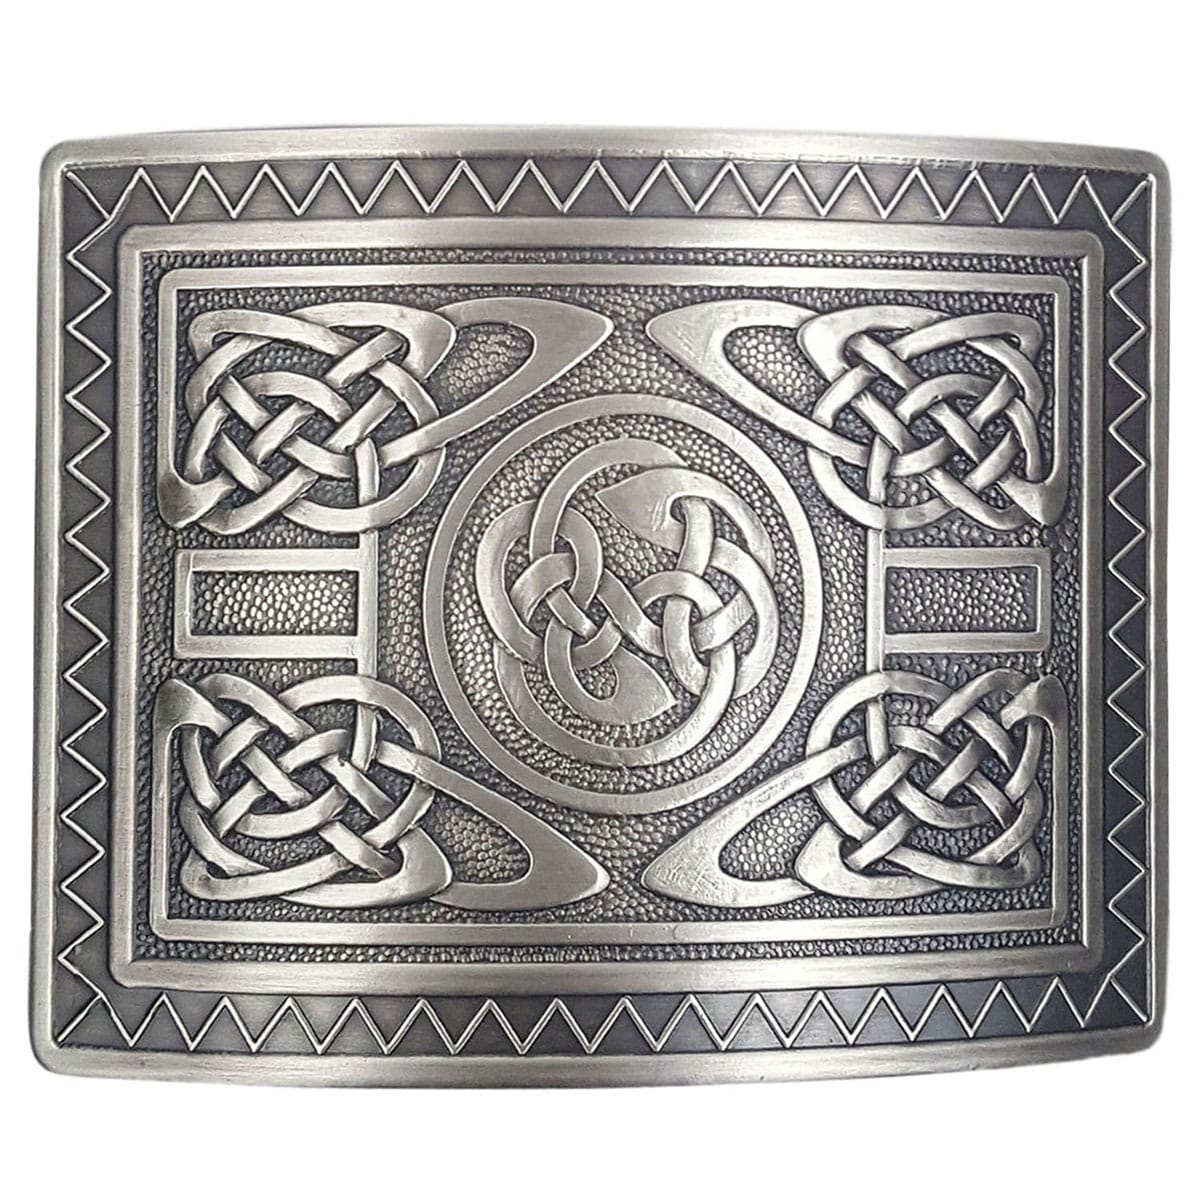 A Highland Swirl Antiqued Kilt Belt Buckle with an intricate design and an antiqued finish.